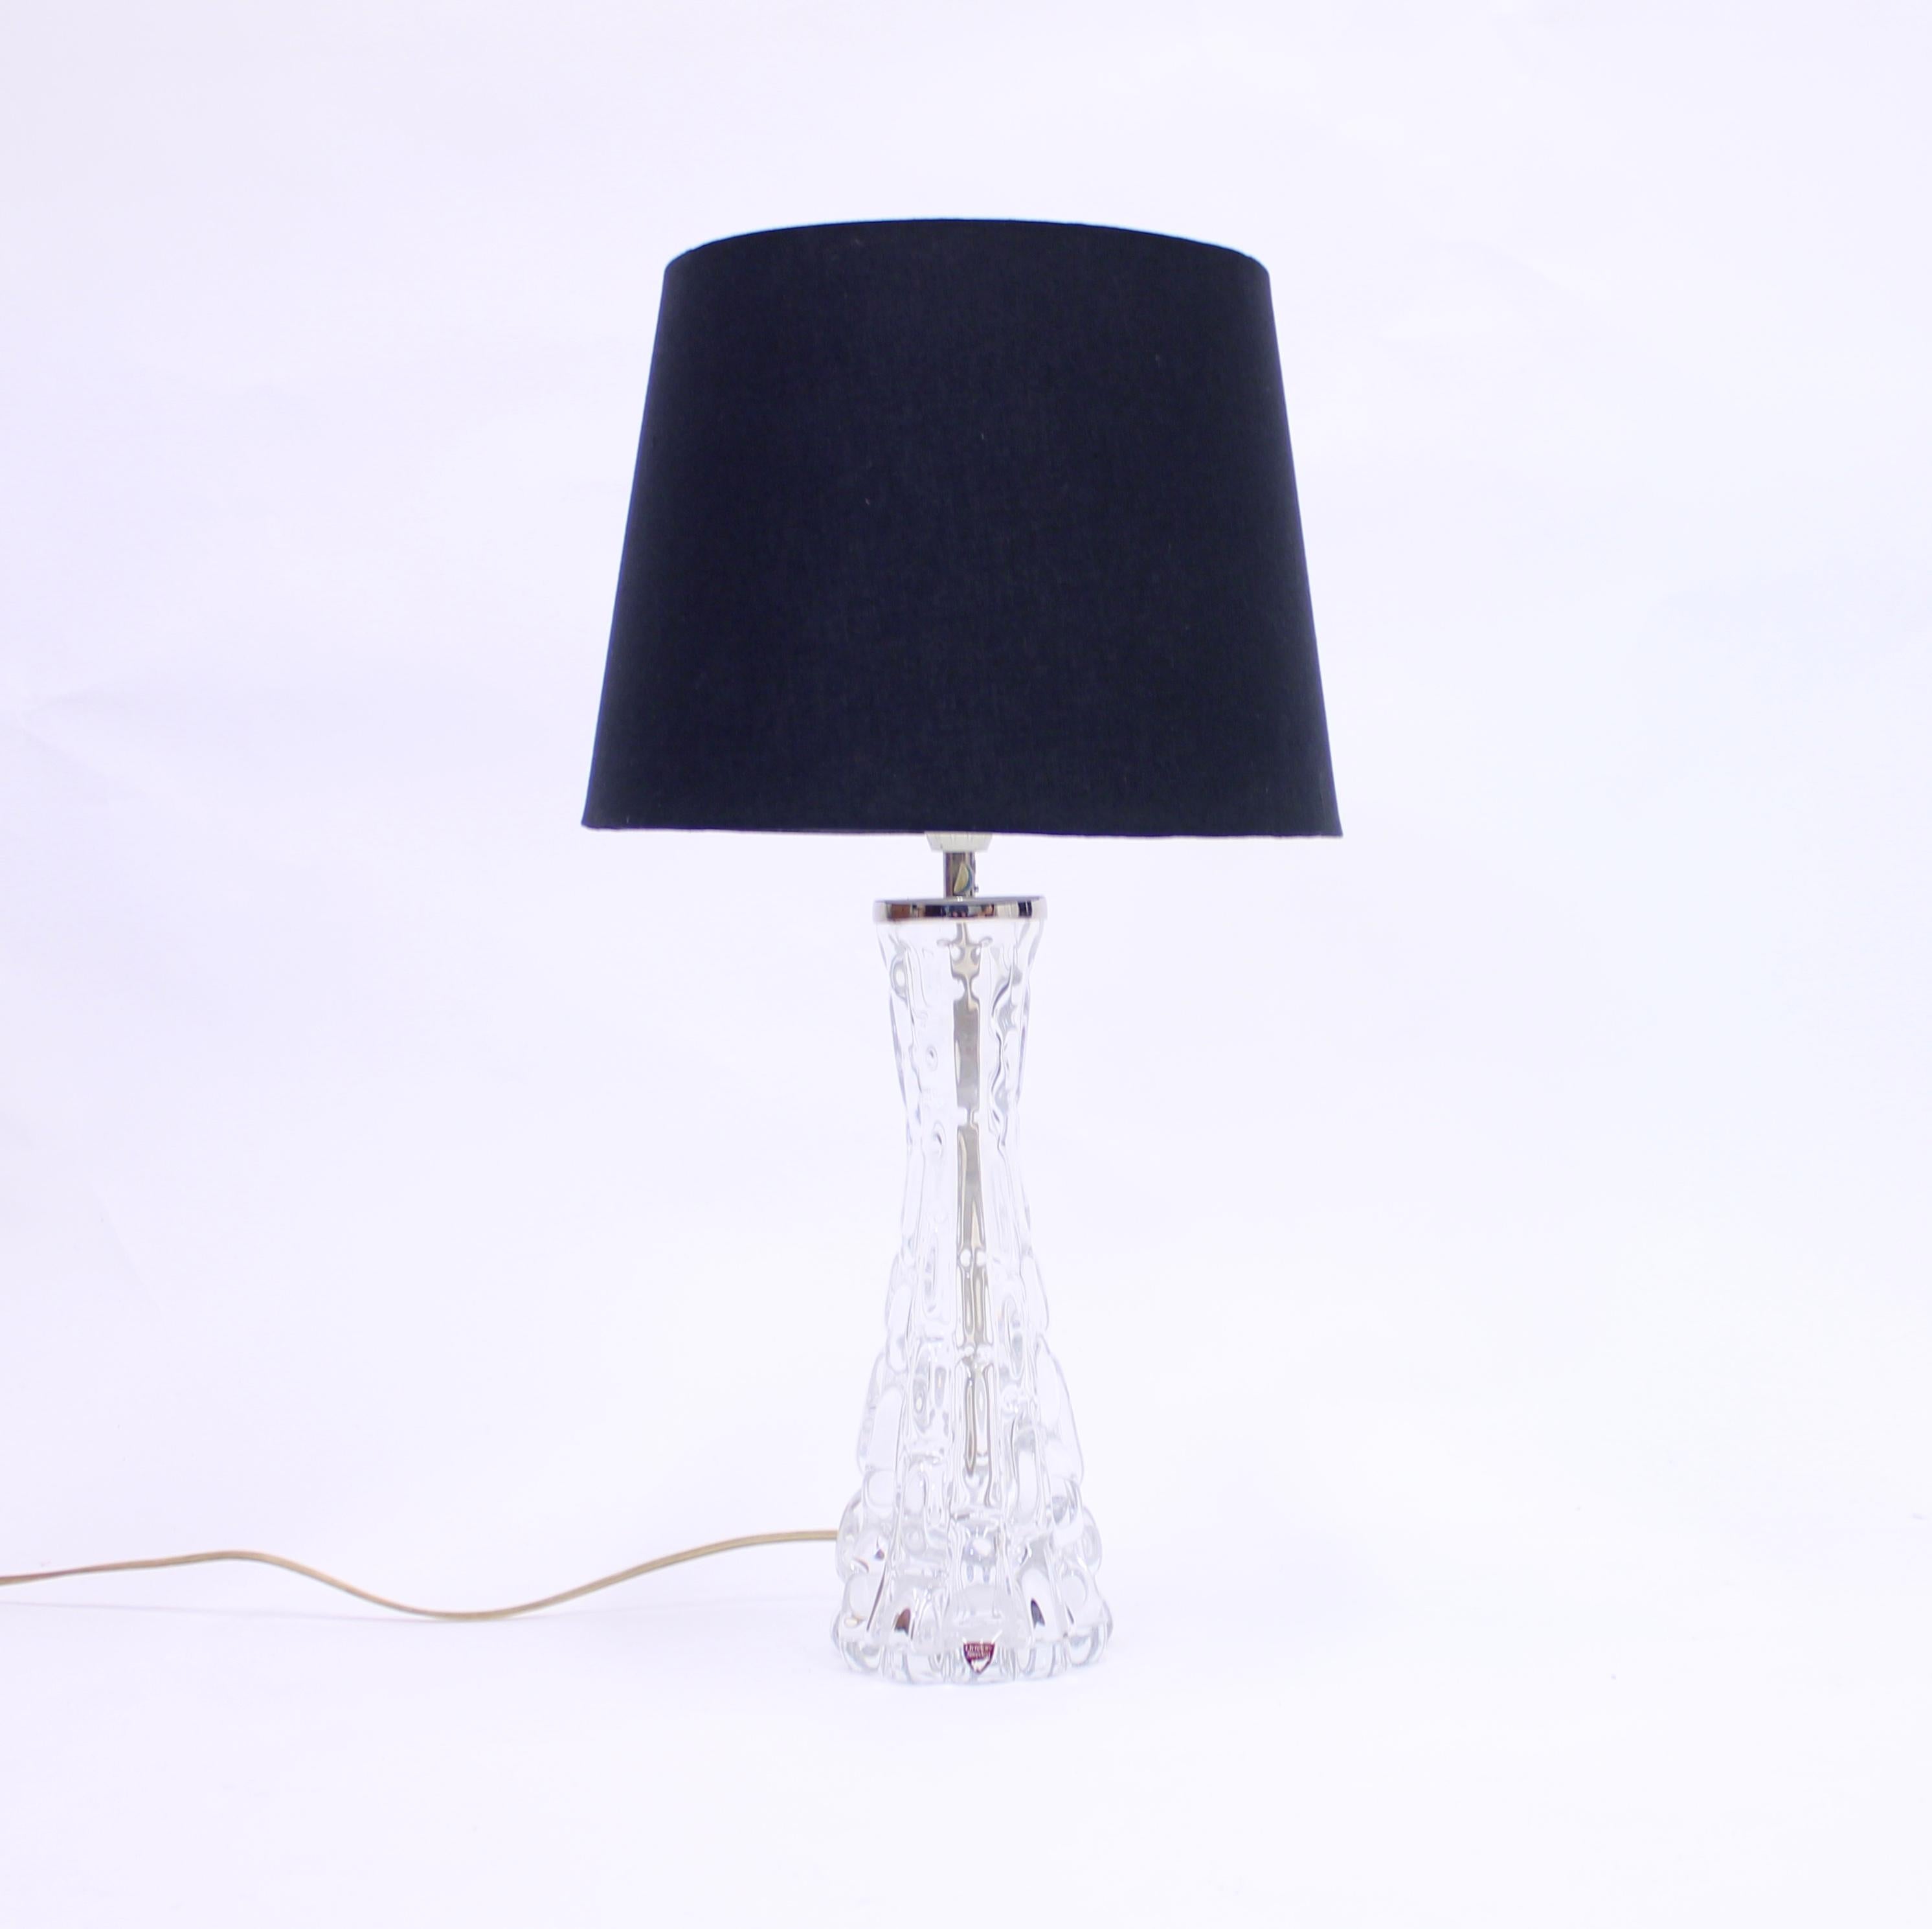 Glass table lamp designed by Carl Fagerlund for Swedish glass manufacturer Orrefors in the 1960s. Top of the base with chrome fitting and a new black fabric shade. Labeled by Orrefors both on the chrome part and also on the front with stickers. Good